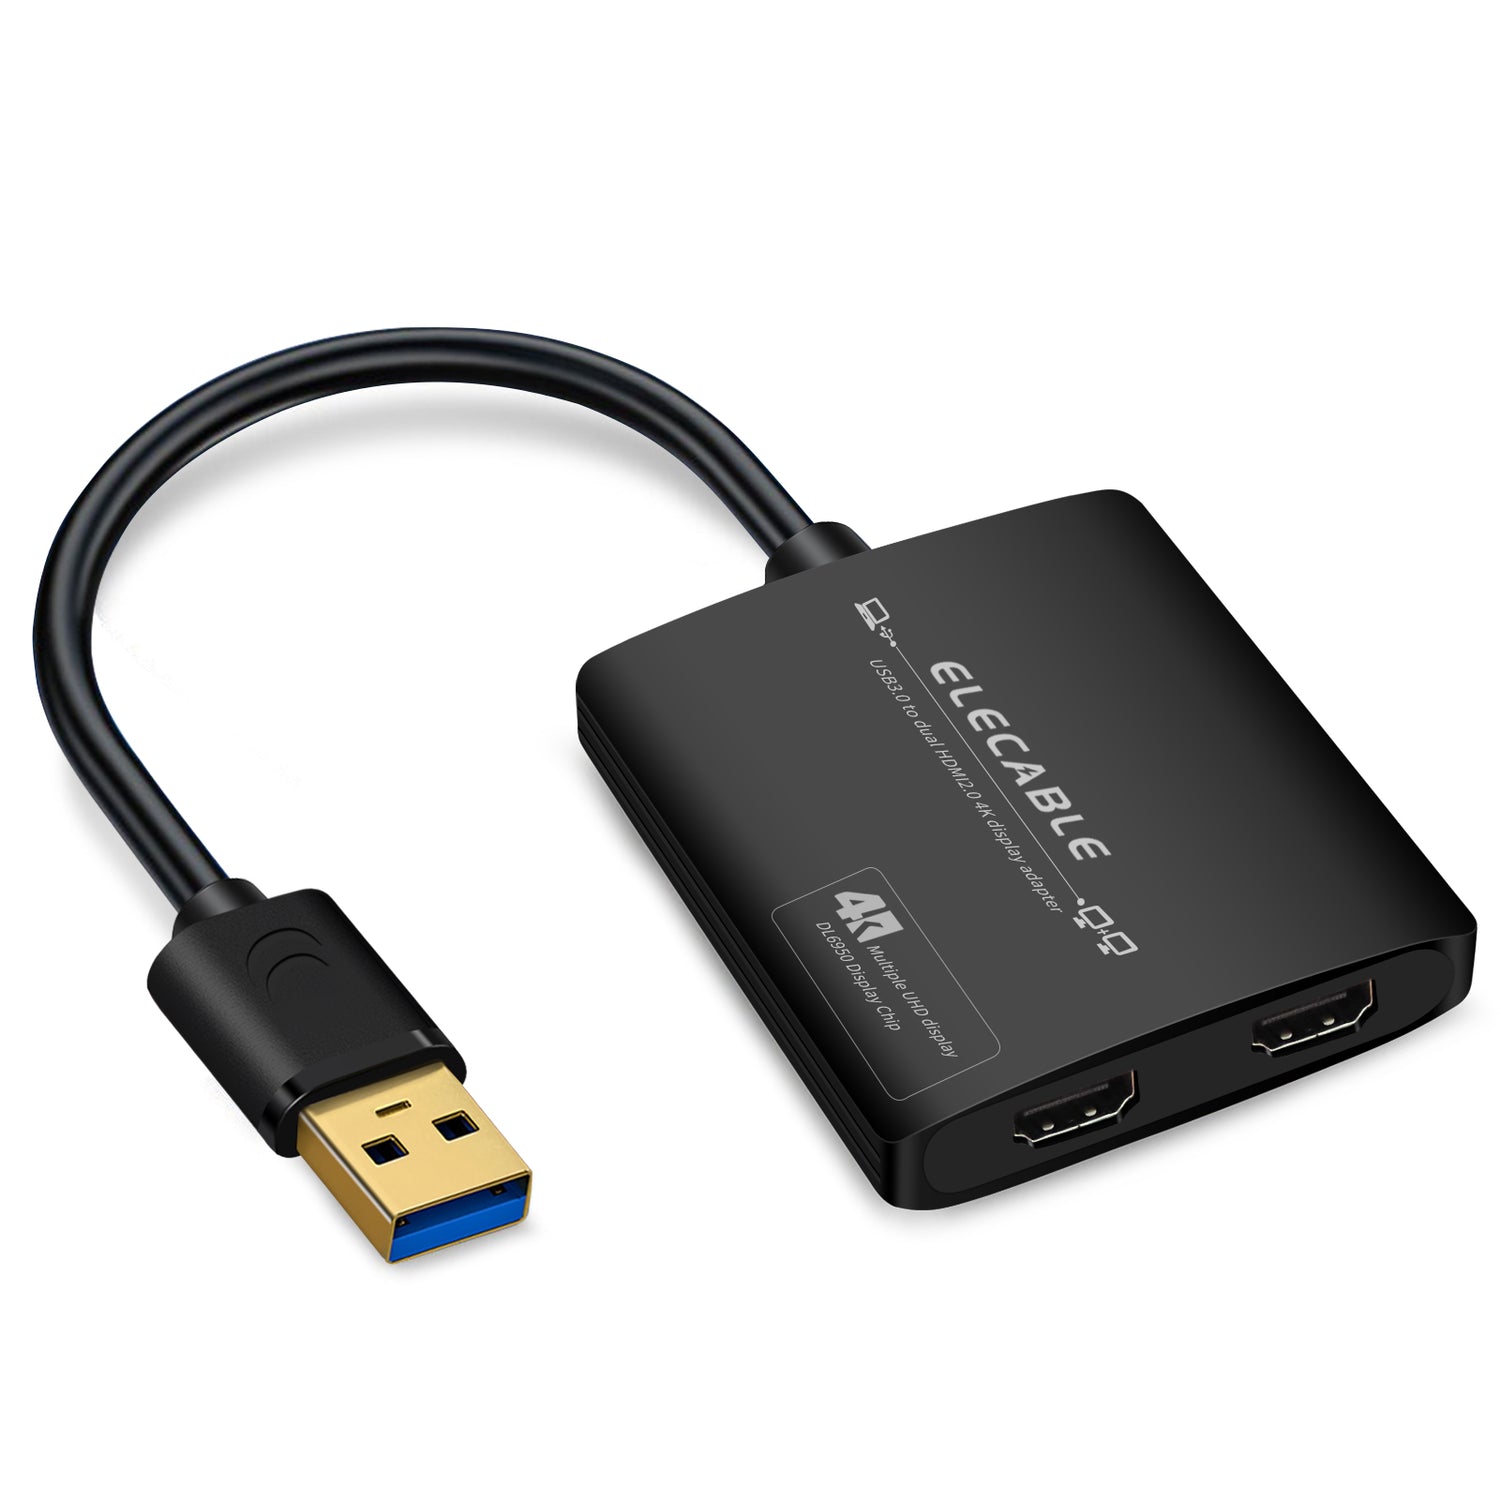 USB to HDMI Adapter Cable – ELECABLE